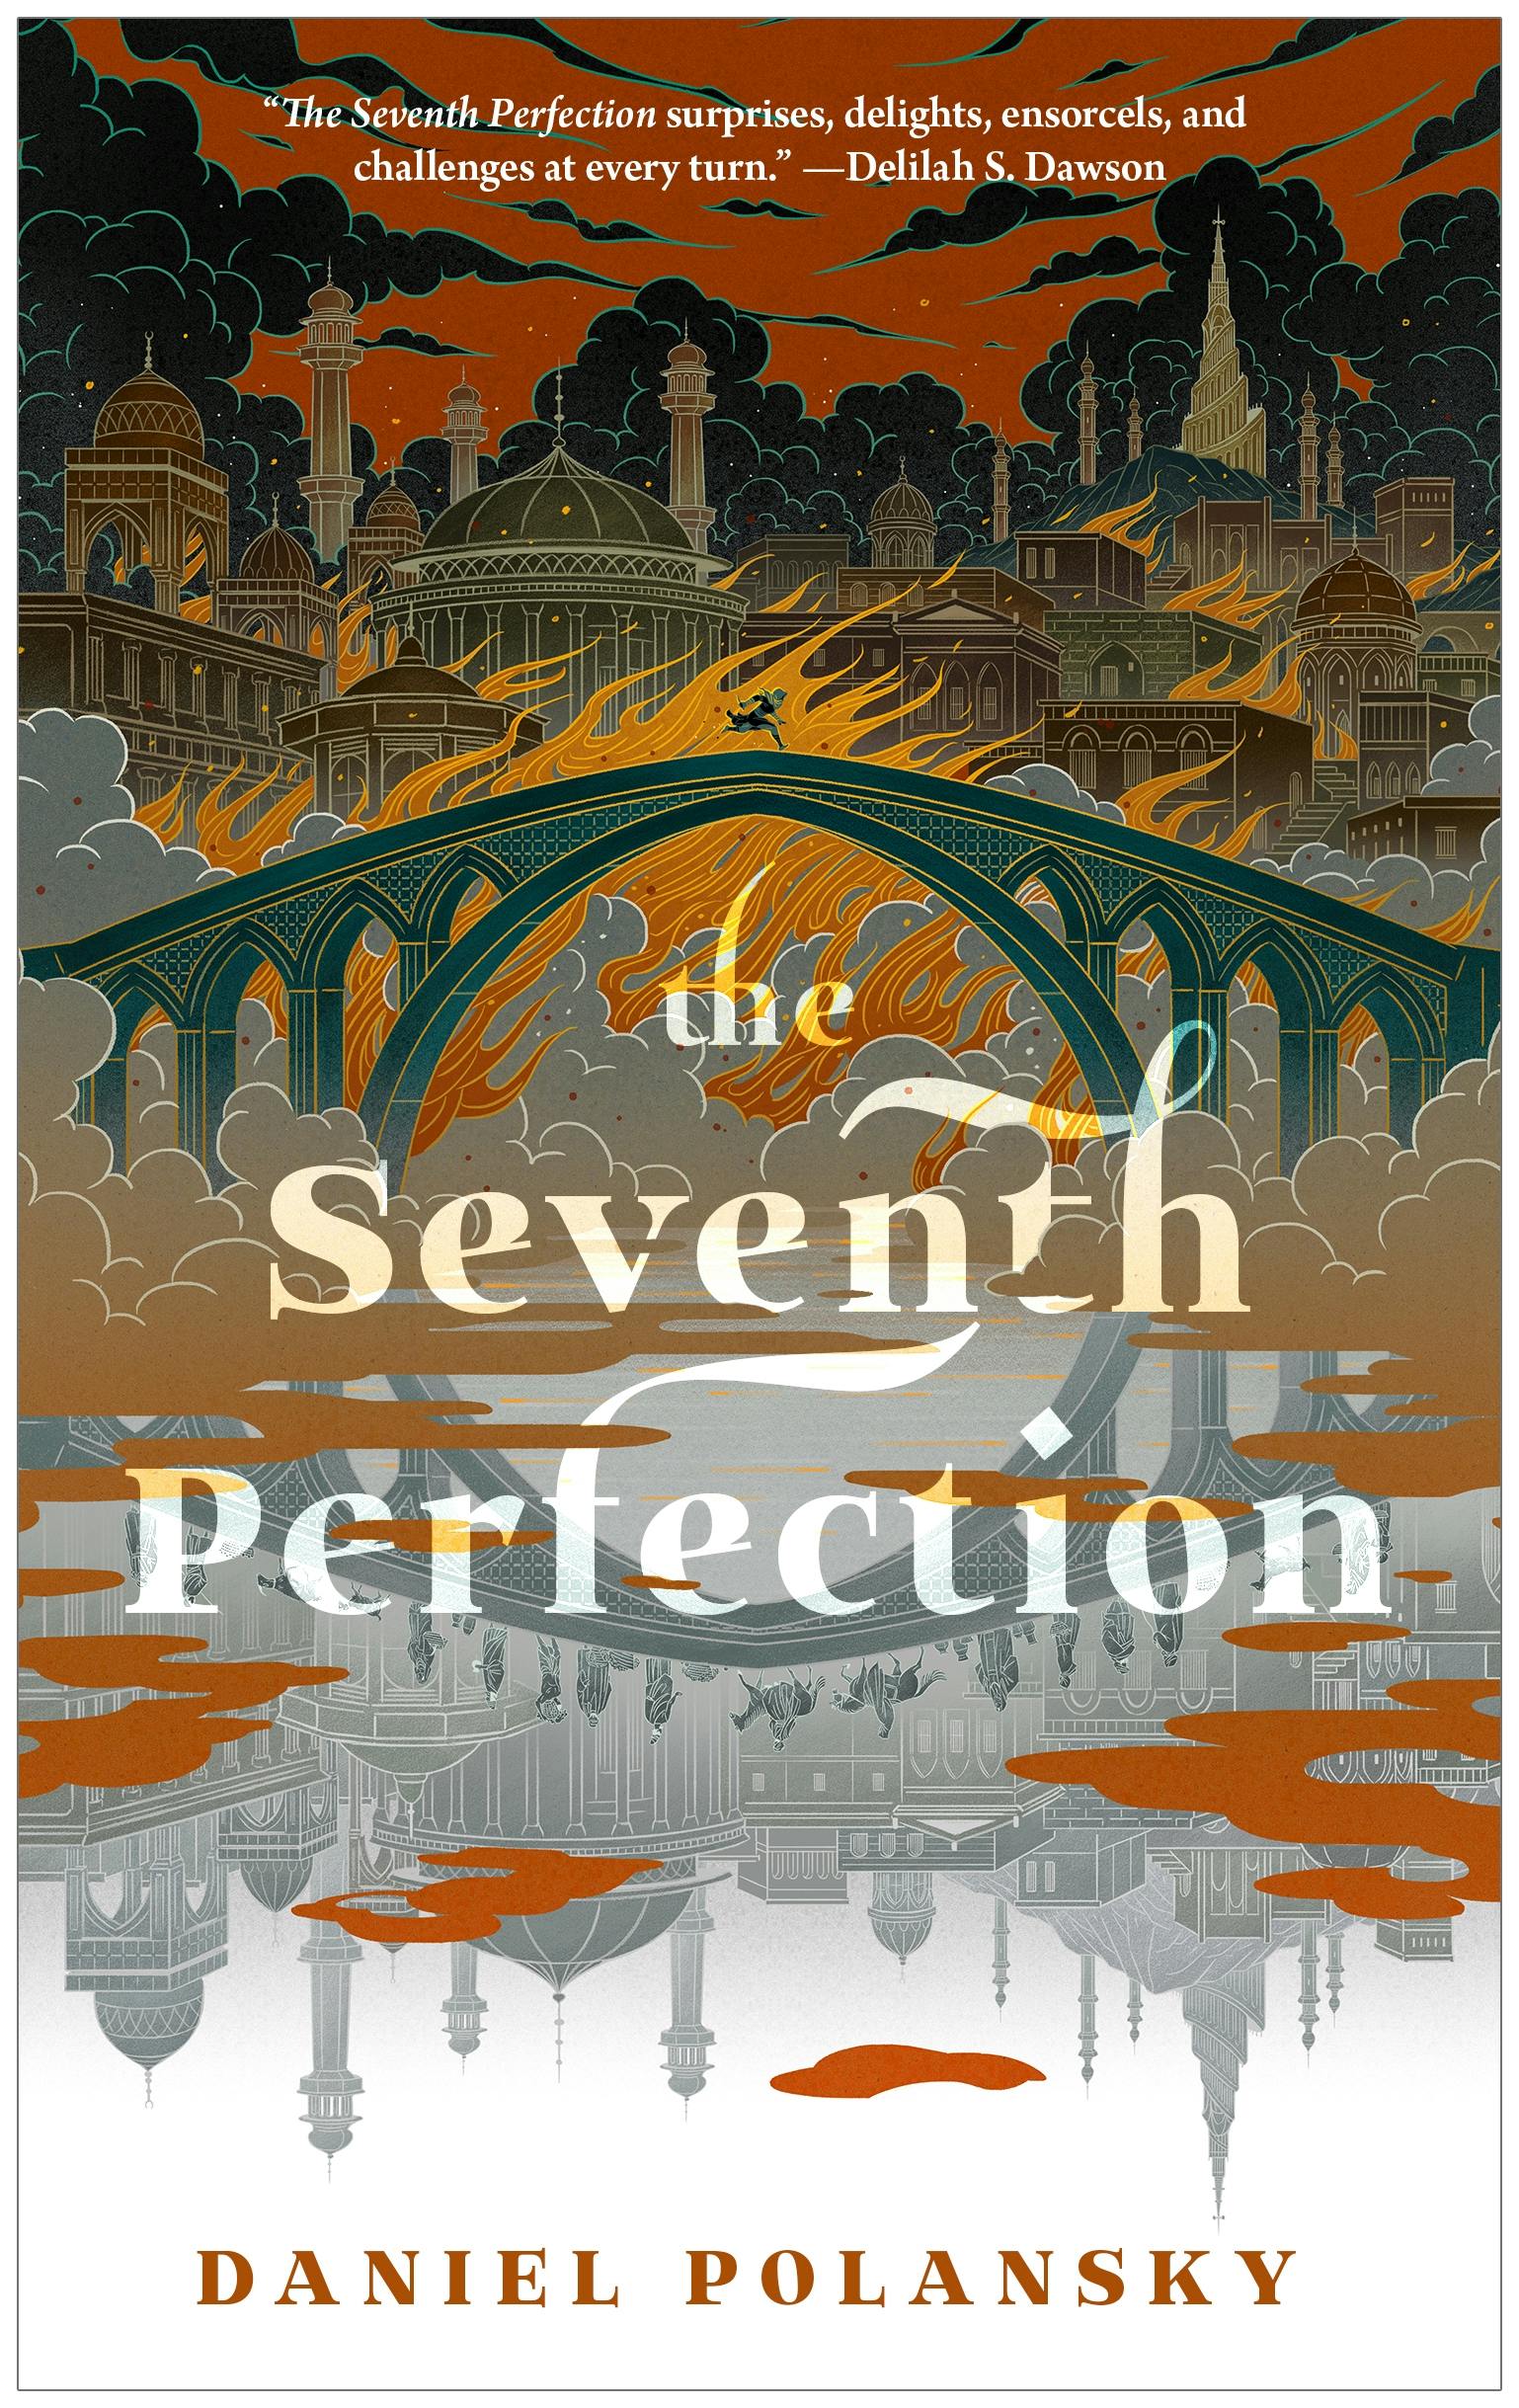 Cover for the book titled as: The Seventh Perfection